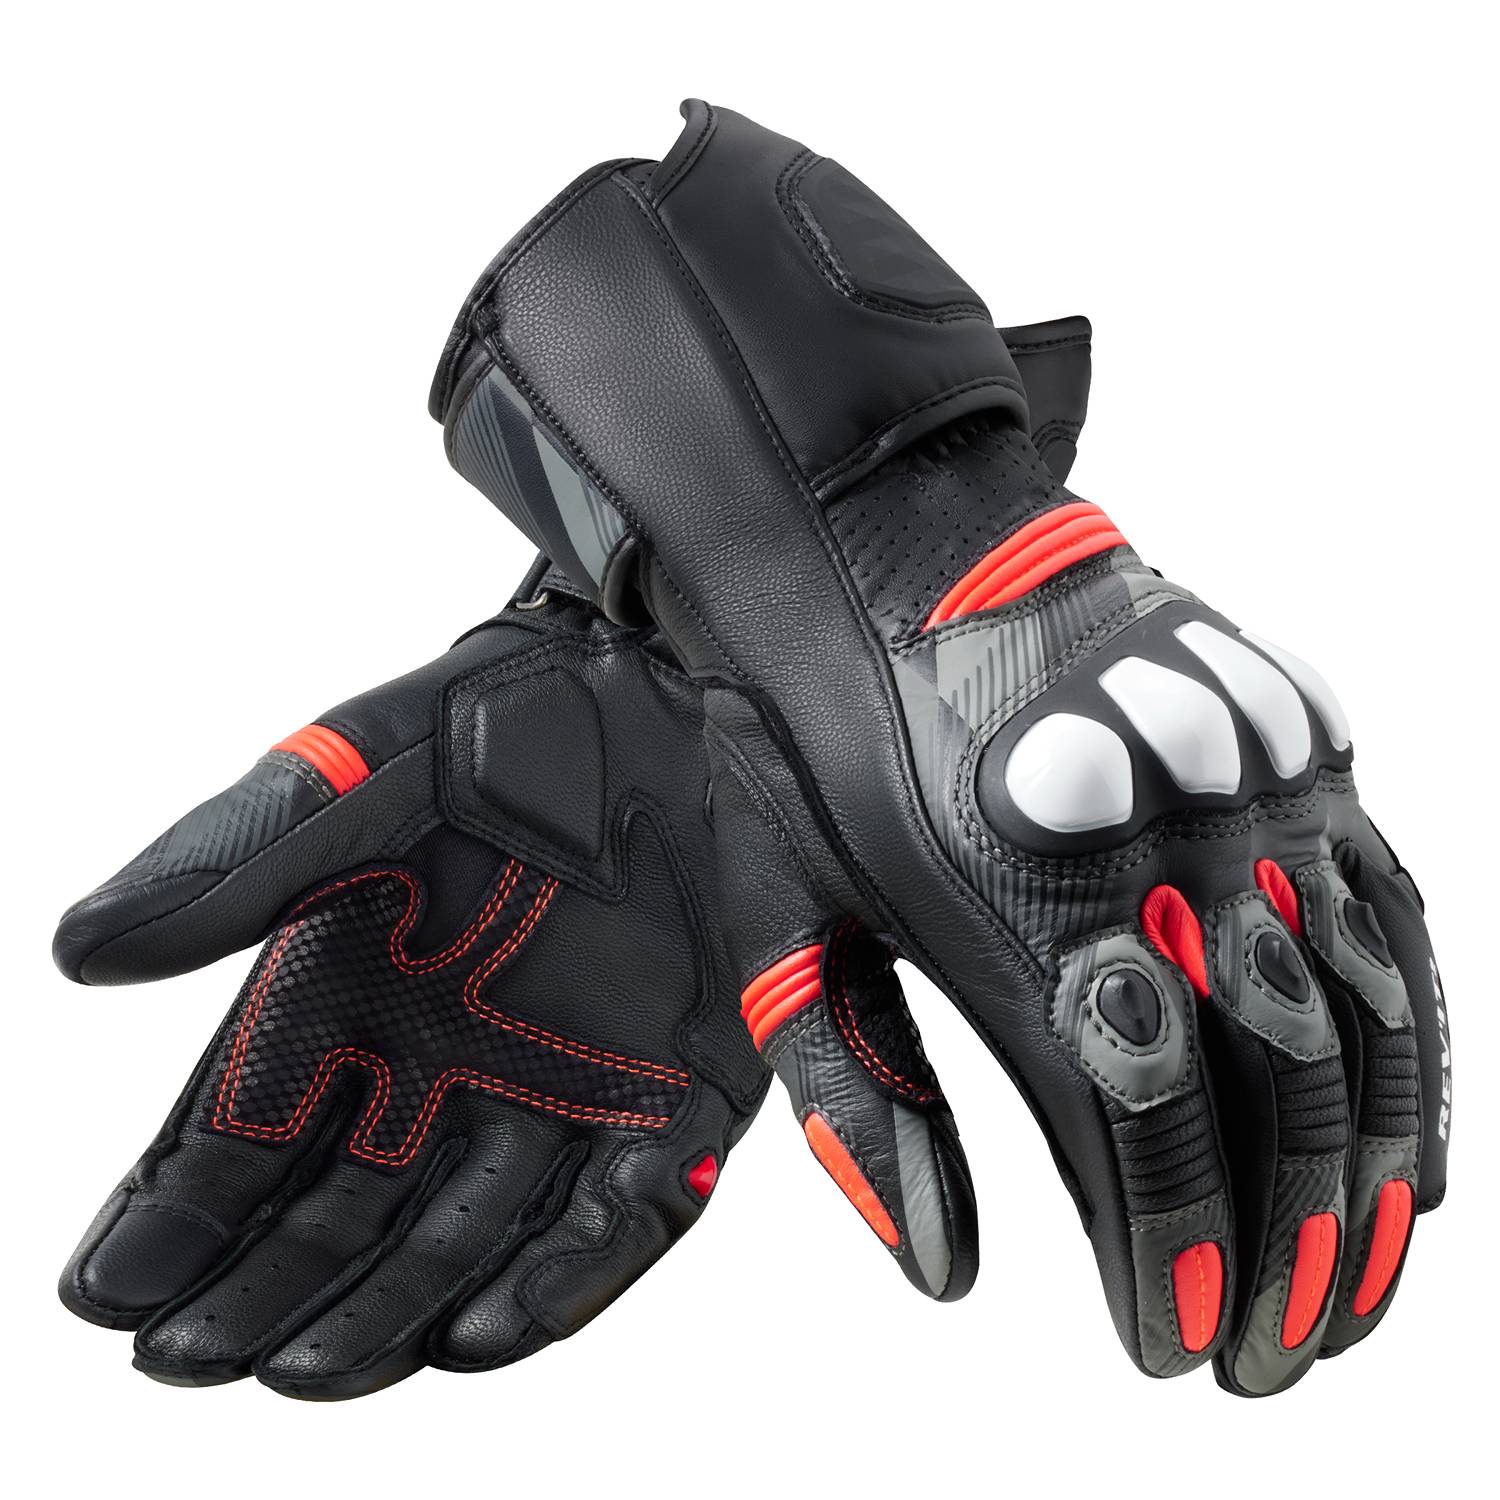 Image of REV'IT! League 2 Gloves Black Neon Red Size M ID 8700001360739